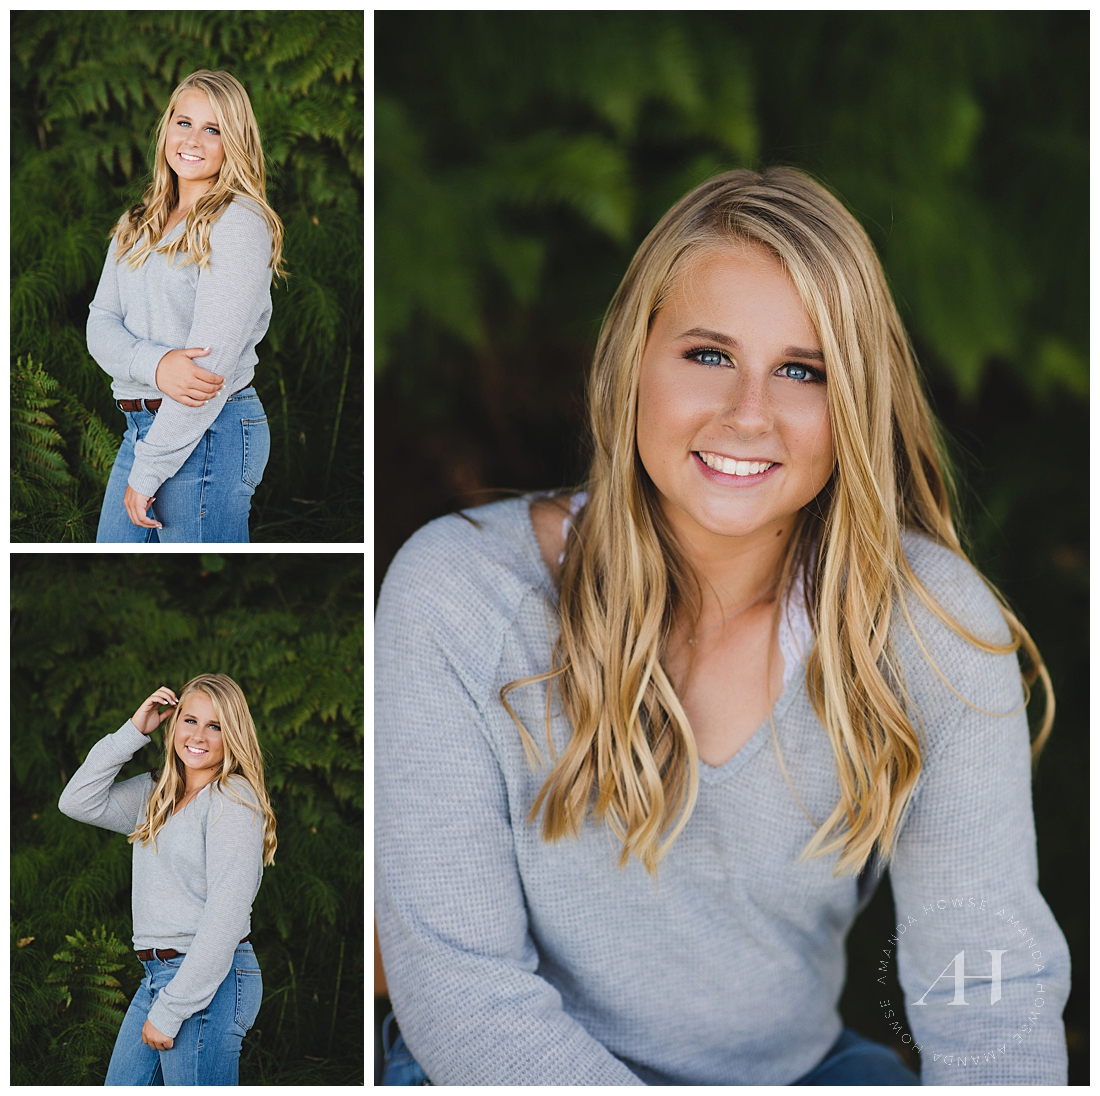 Casual Senior Portraits in Tacoma Photographed by Amanda Howse